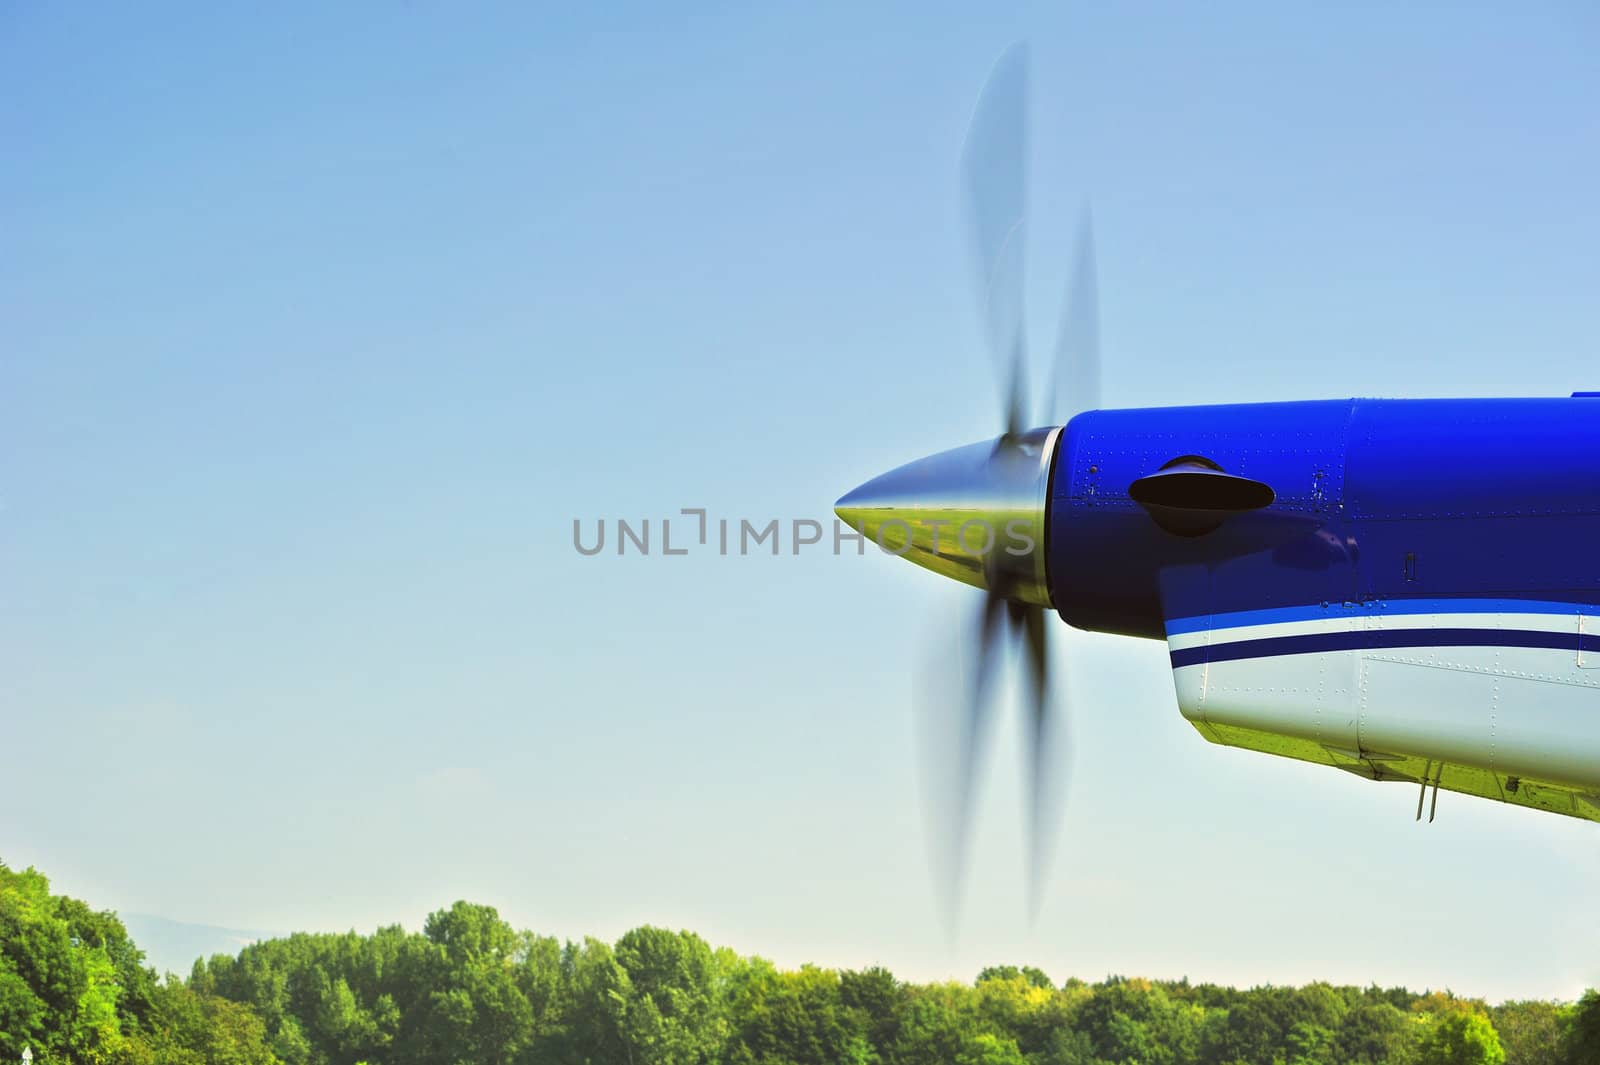 The propeller of an aircraft starting up, with motion blur on the blades. Space for text in the sky.